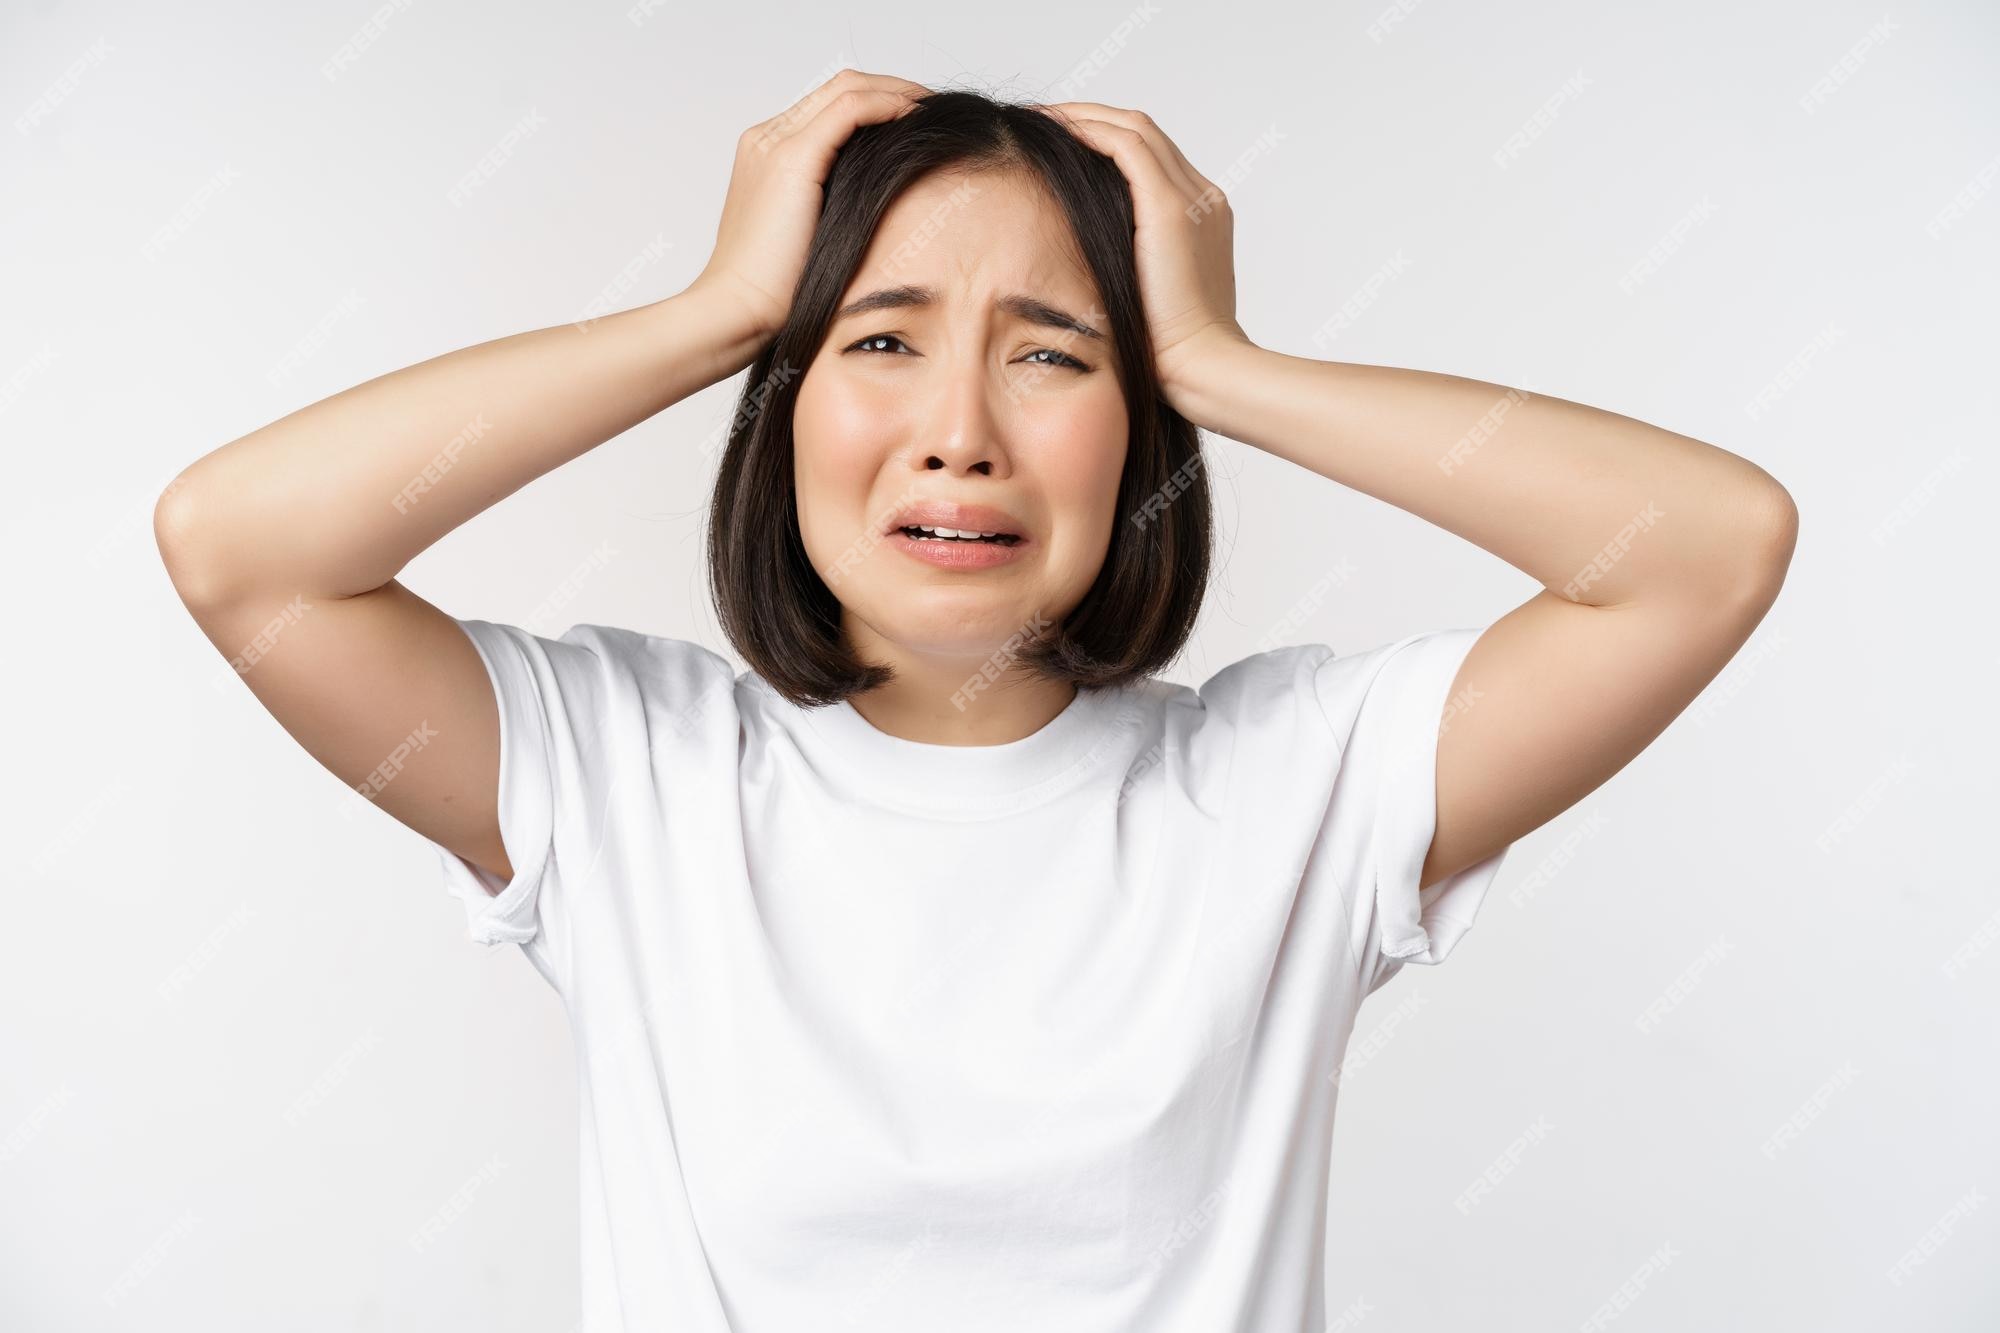 desperate-young-korean-woman-holding-hands-head-panicking-crying-standing-distressed-against-white-background_1258-88986.jpg